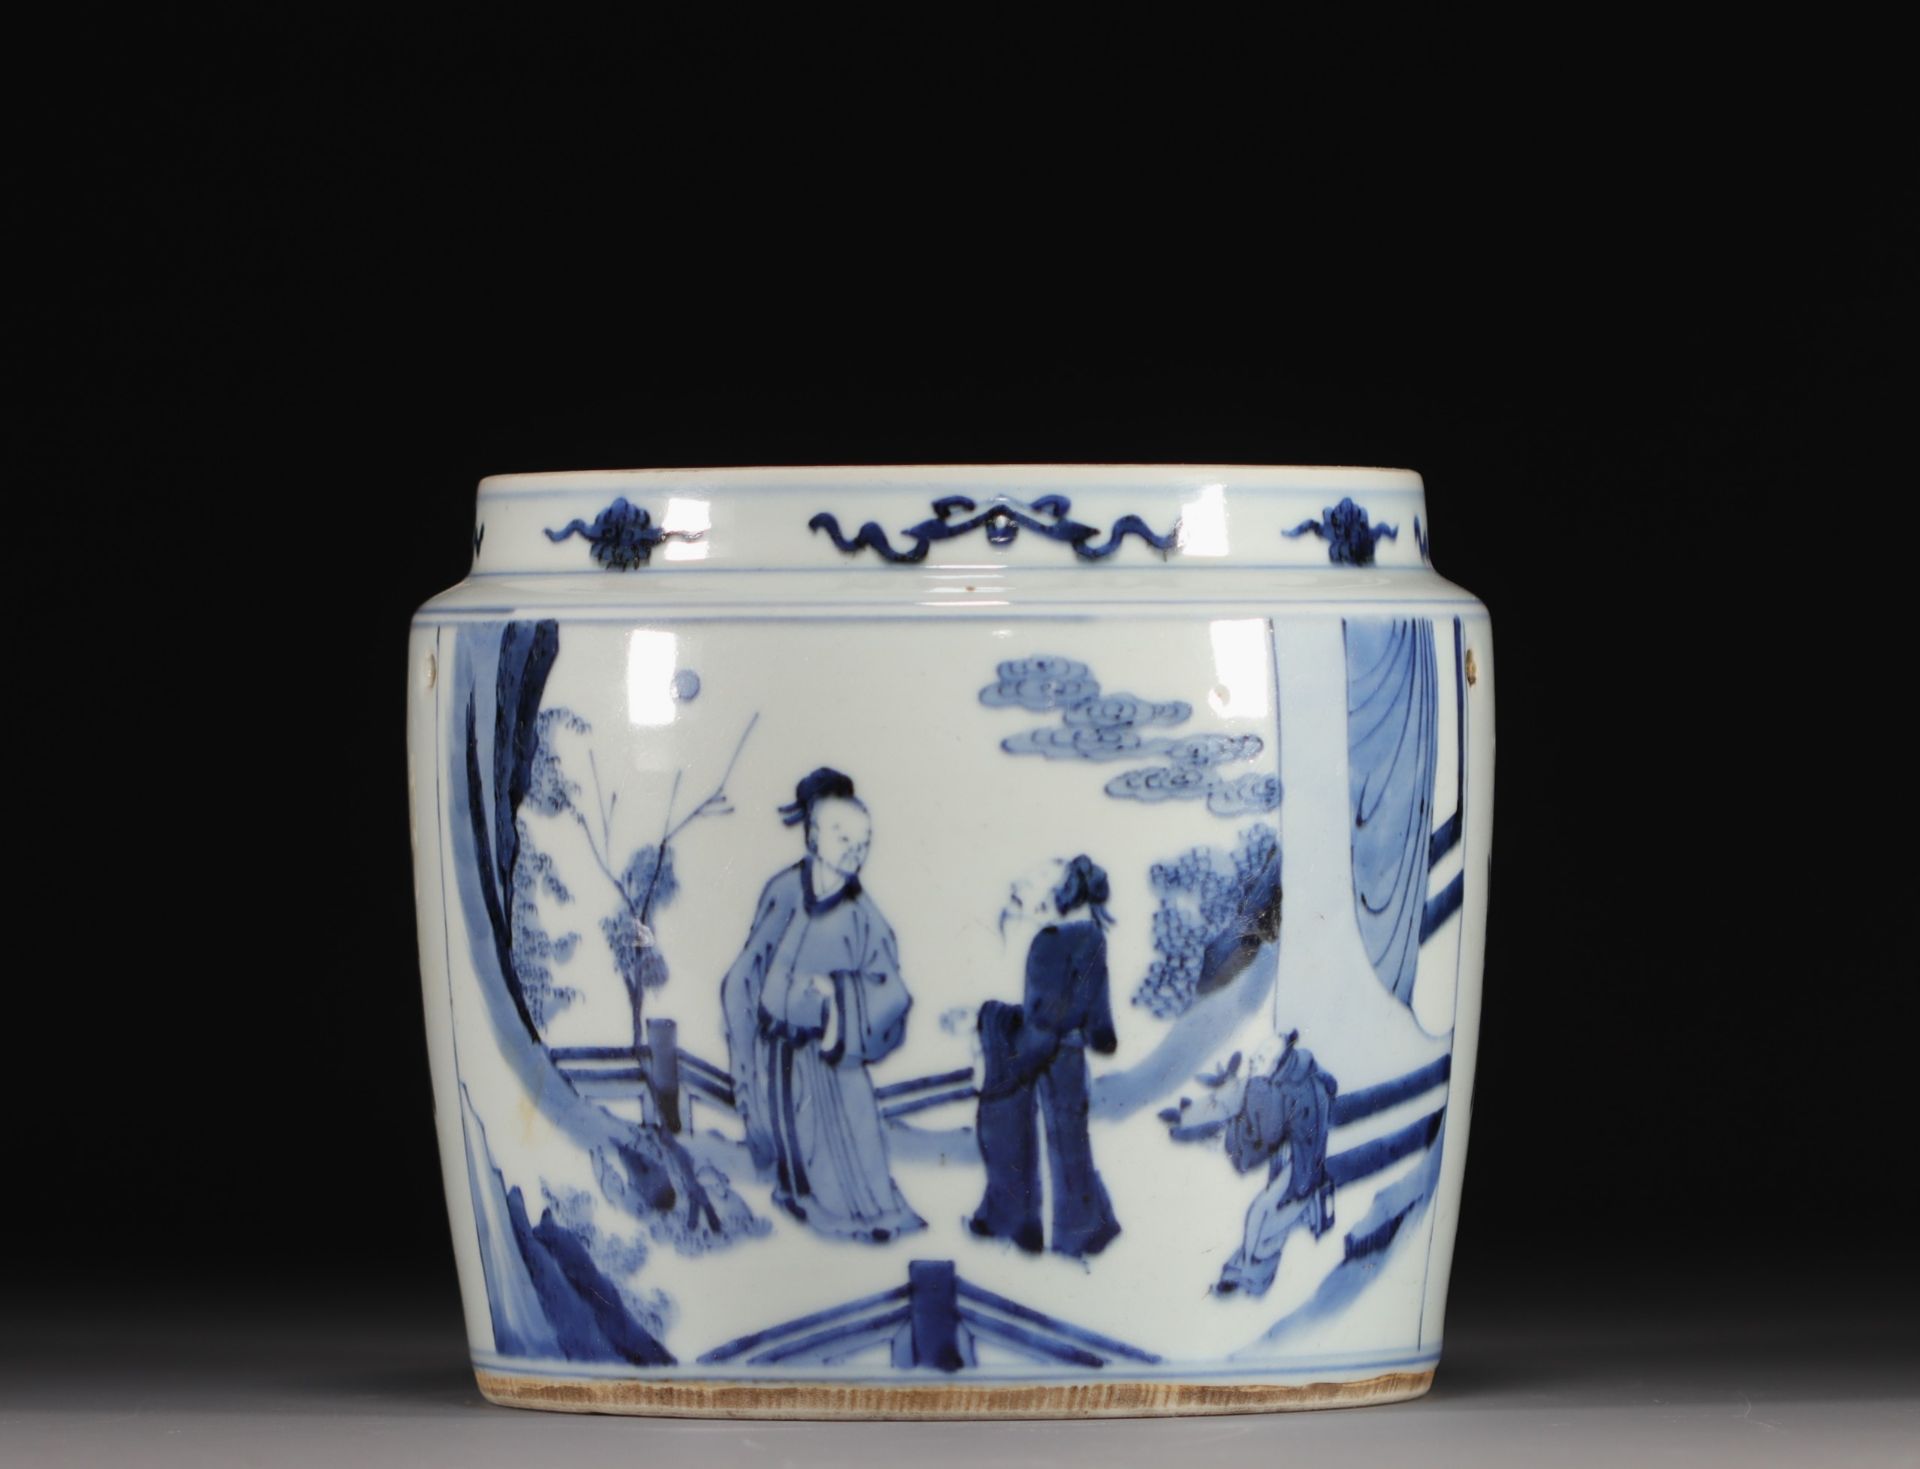 China - Perfume burner in blue porcelain with figures, 18th century.